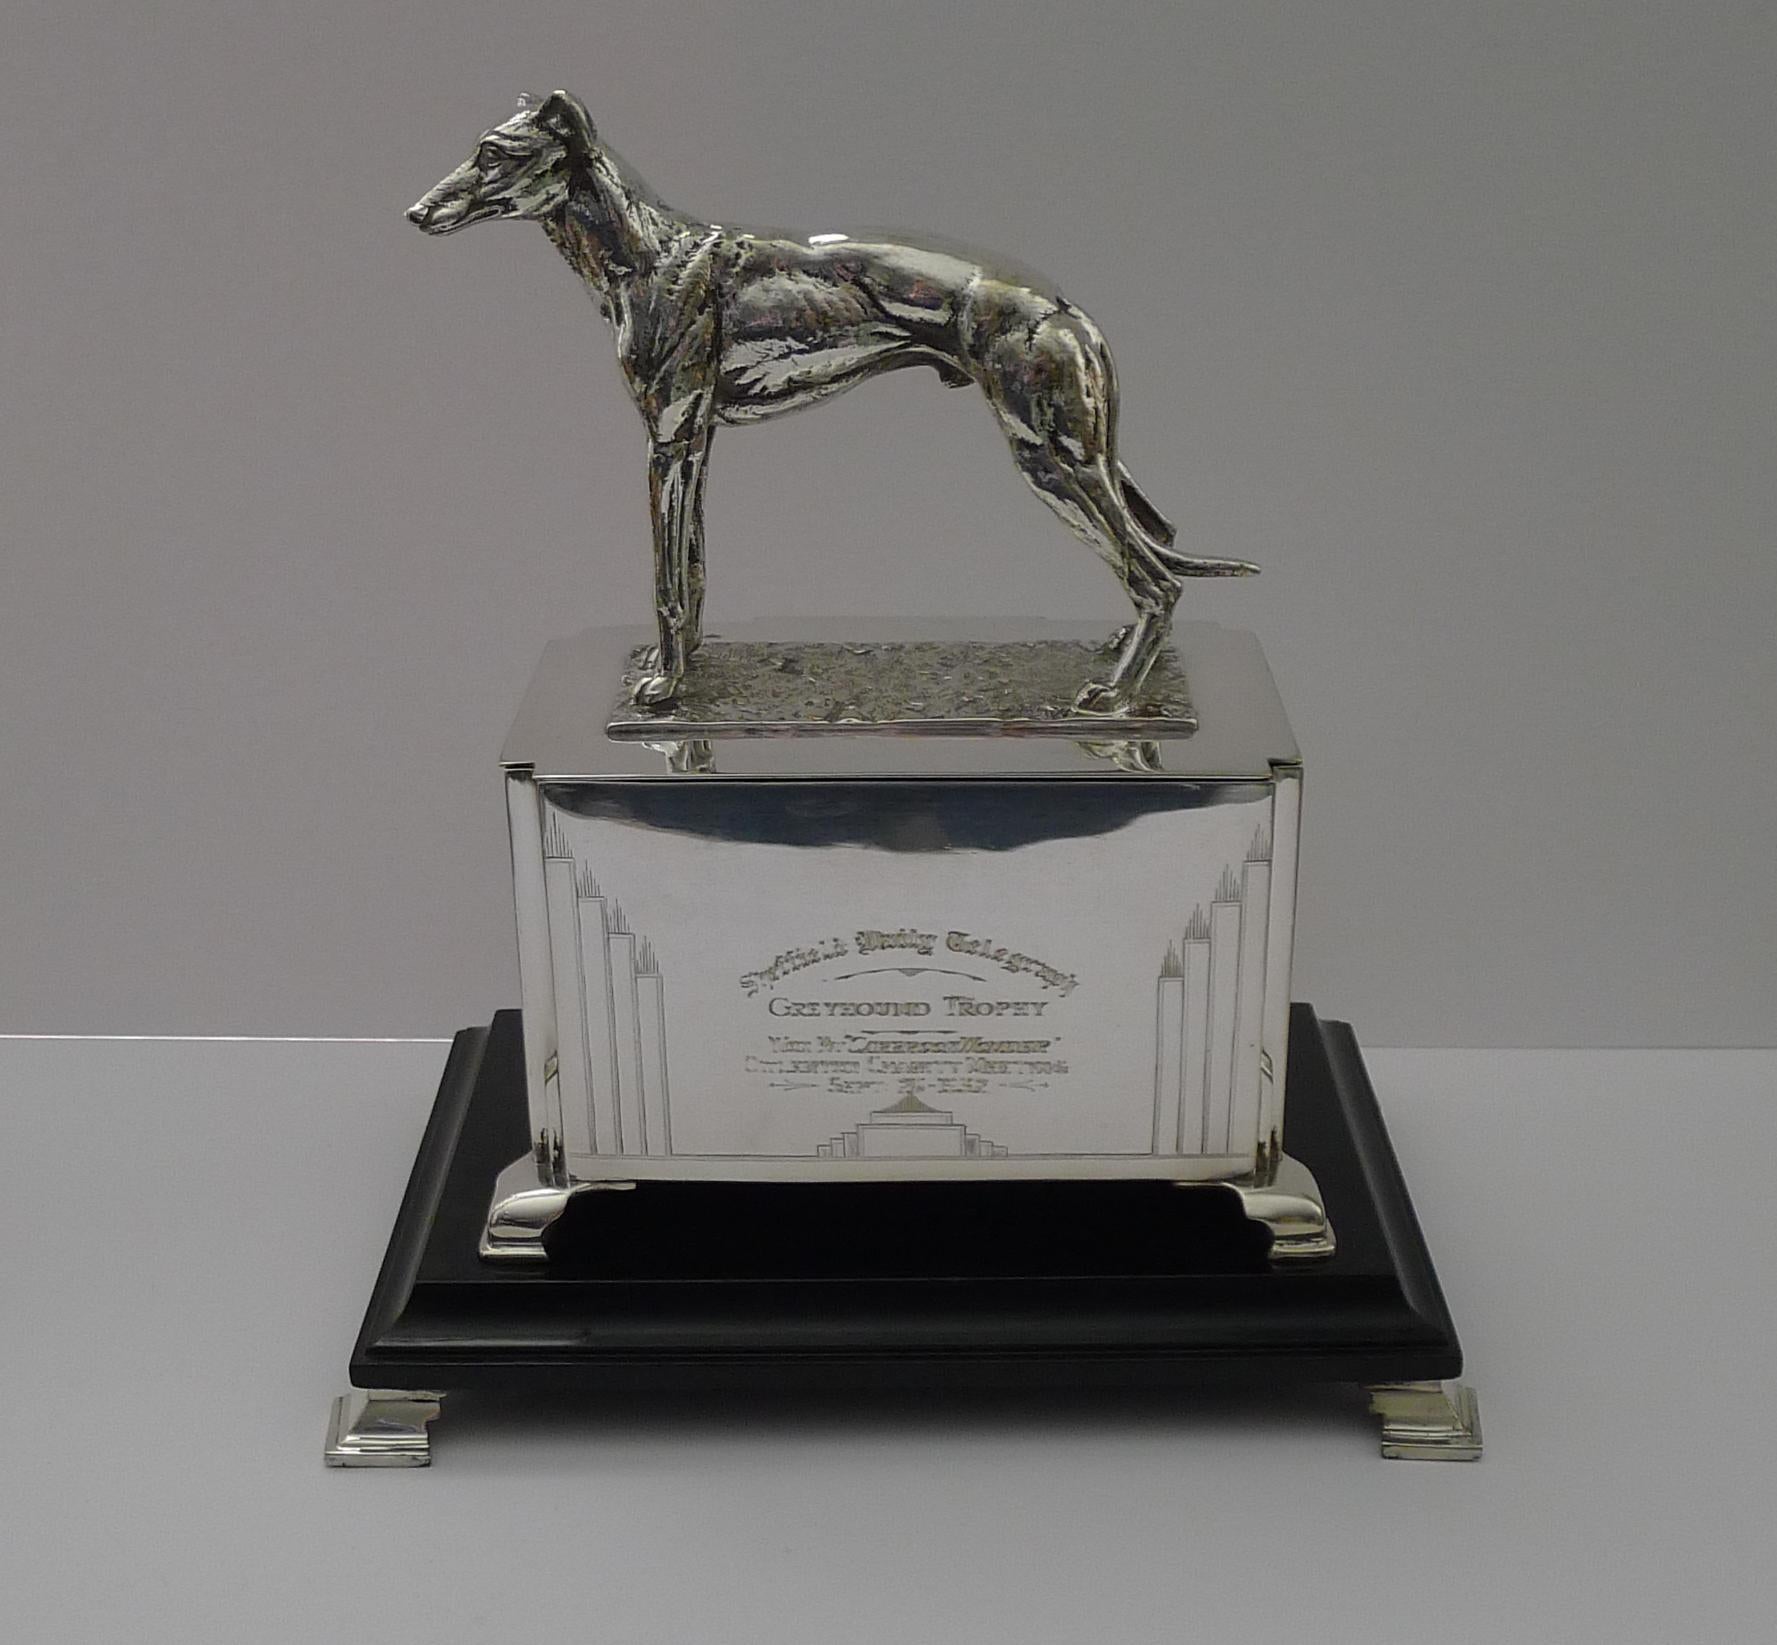 Silver Plate Handsome Art Deco Greyhound Racing Trophy Box, 1932